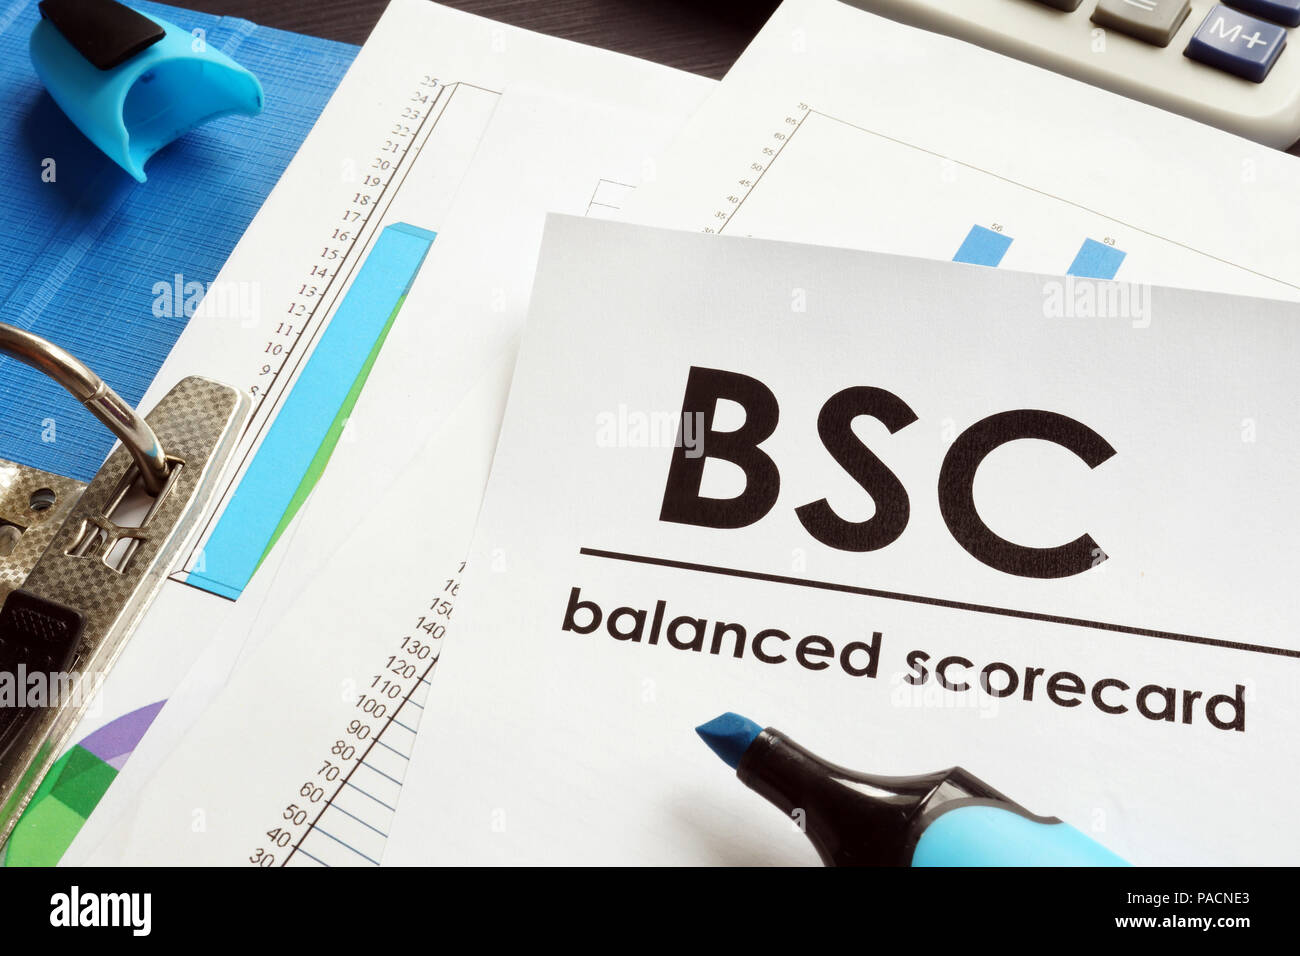 Documents about balanced scorecard BSC on a table. Stock Photo